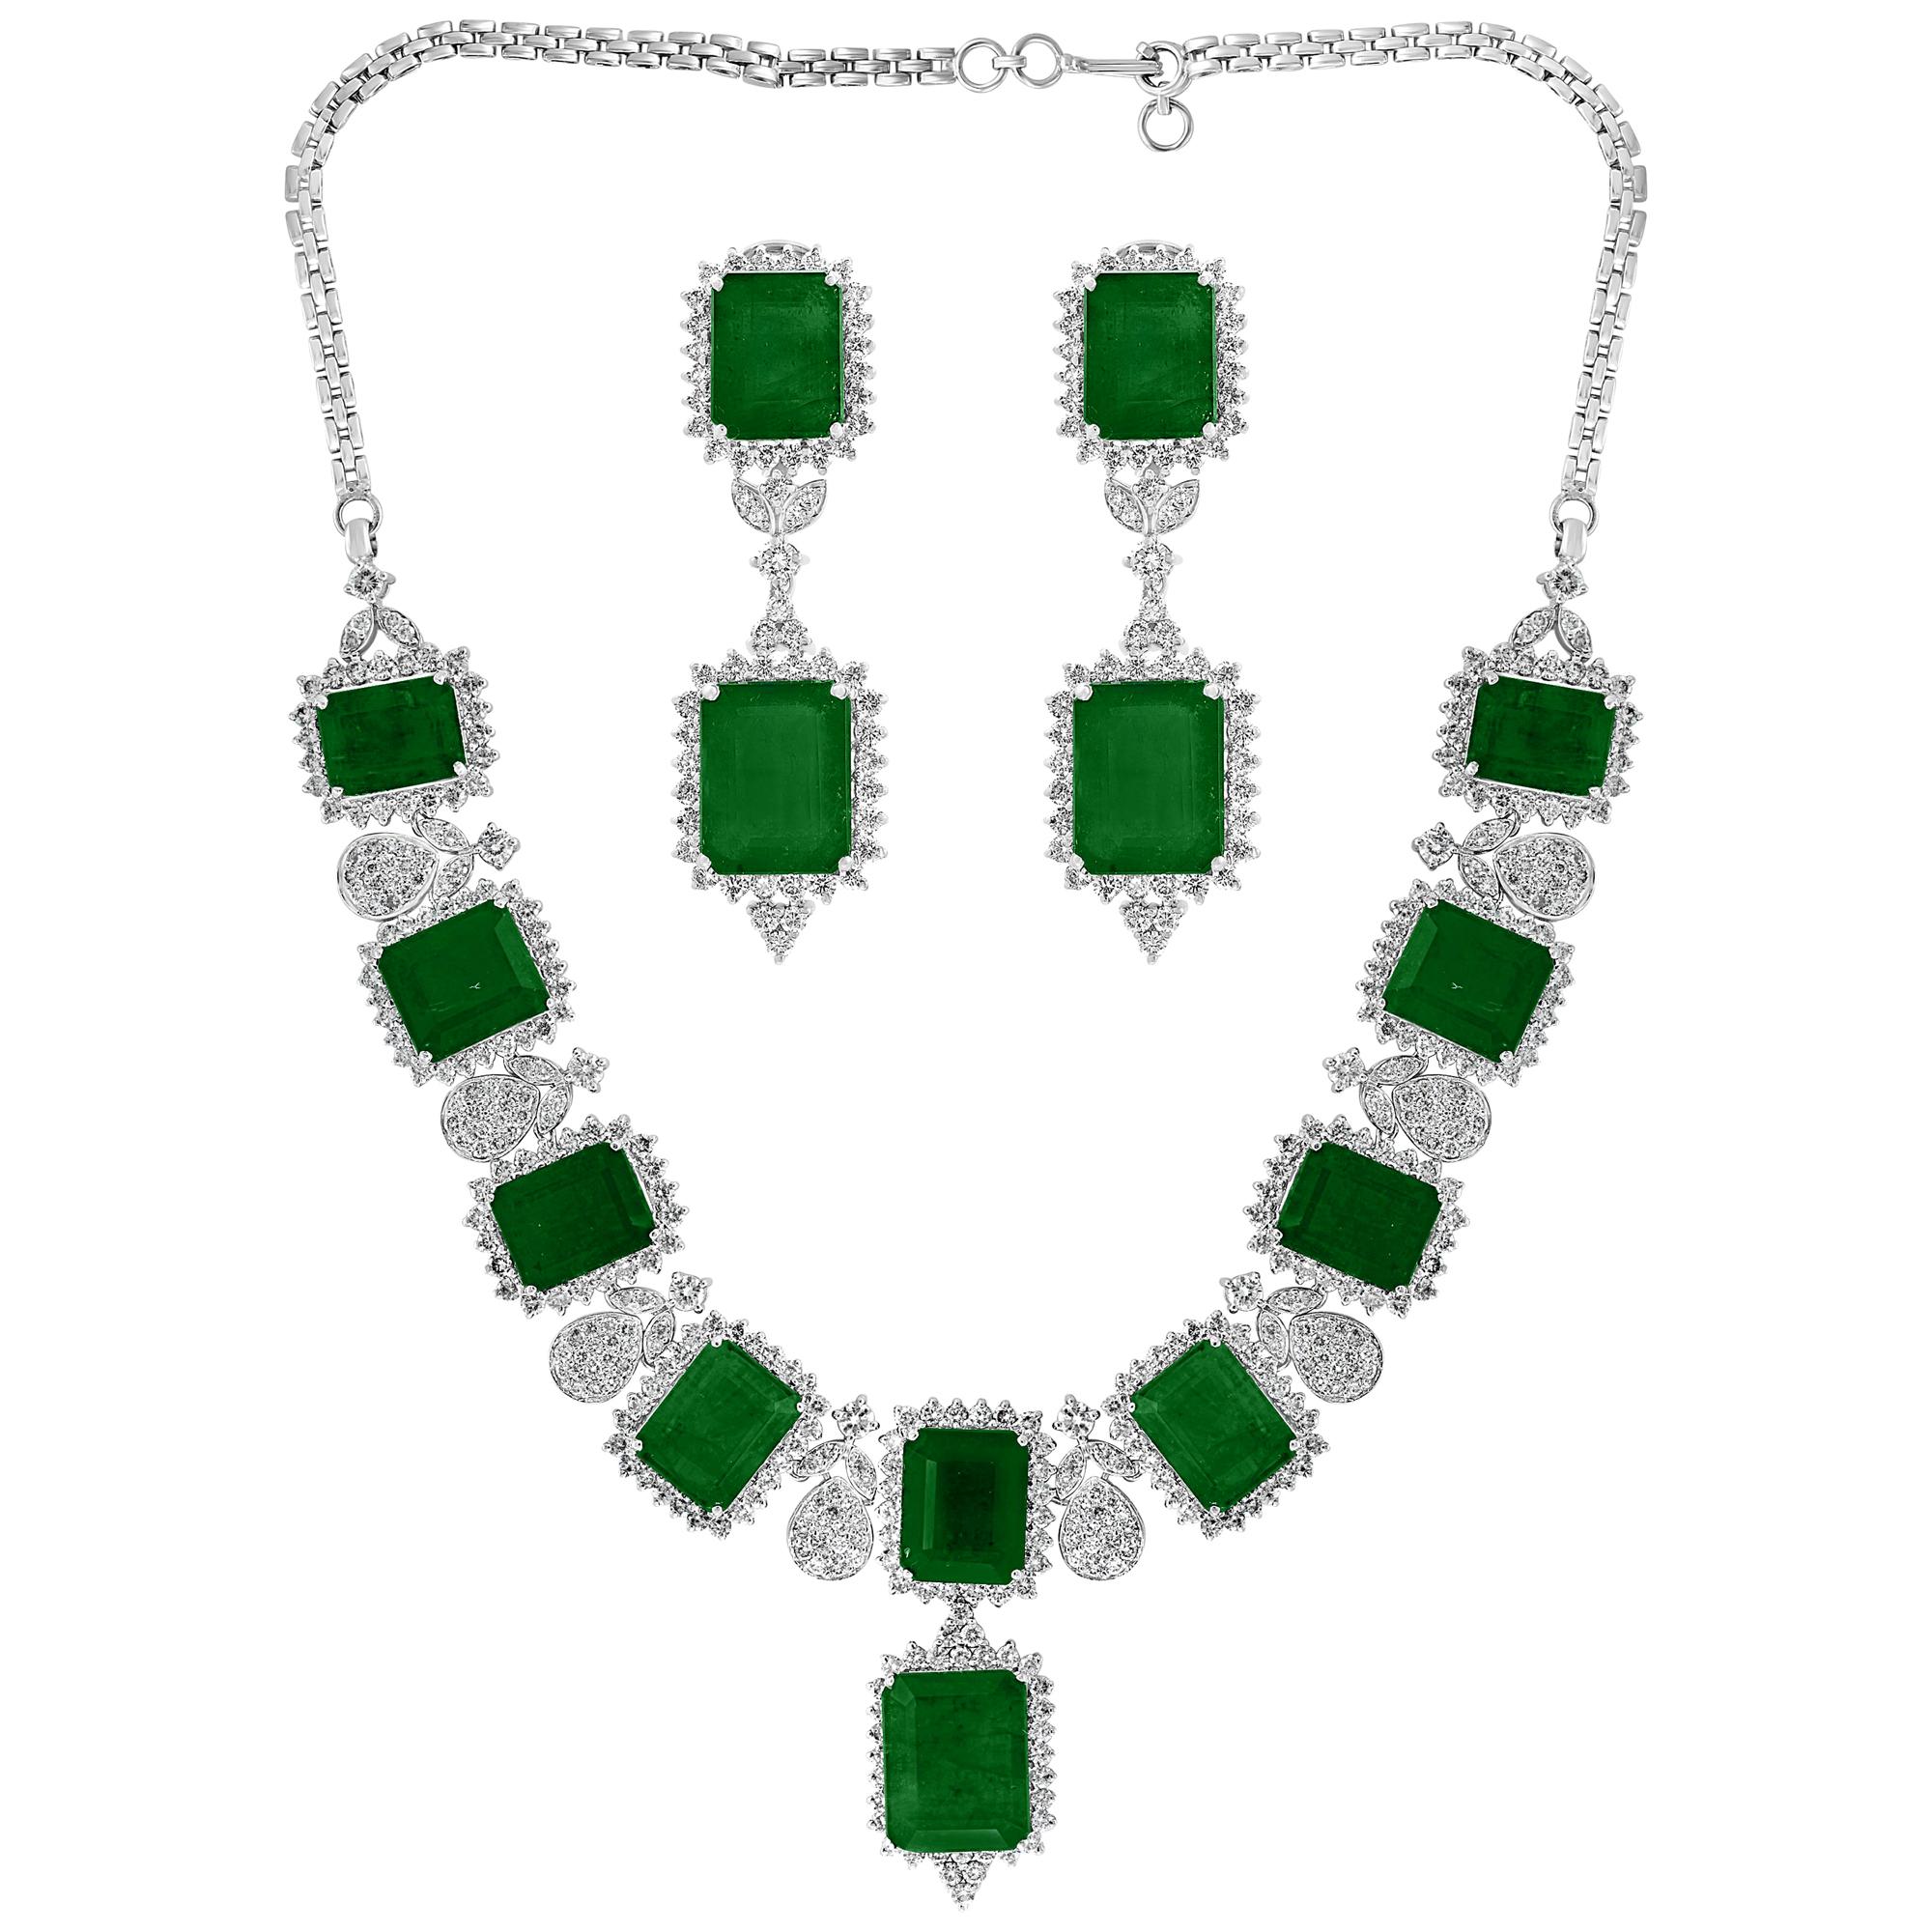 GIA Certified 135 Ct Emerald and 28 Ct Diamond Necklace and Earring Bridal Suite